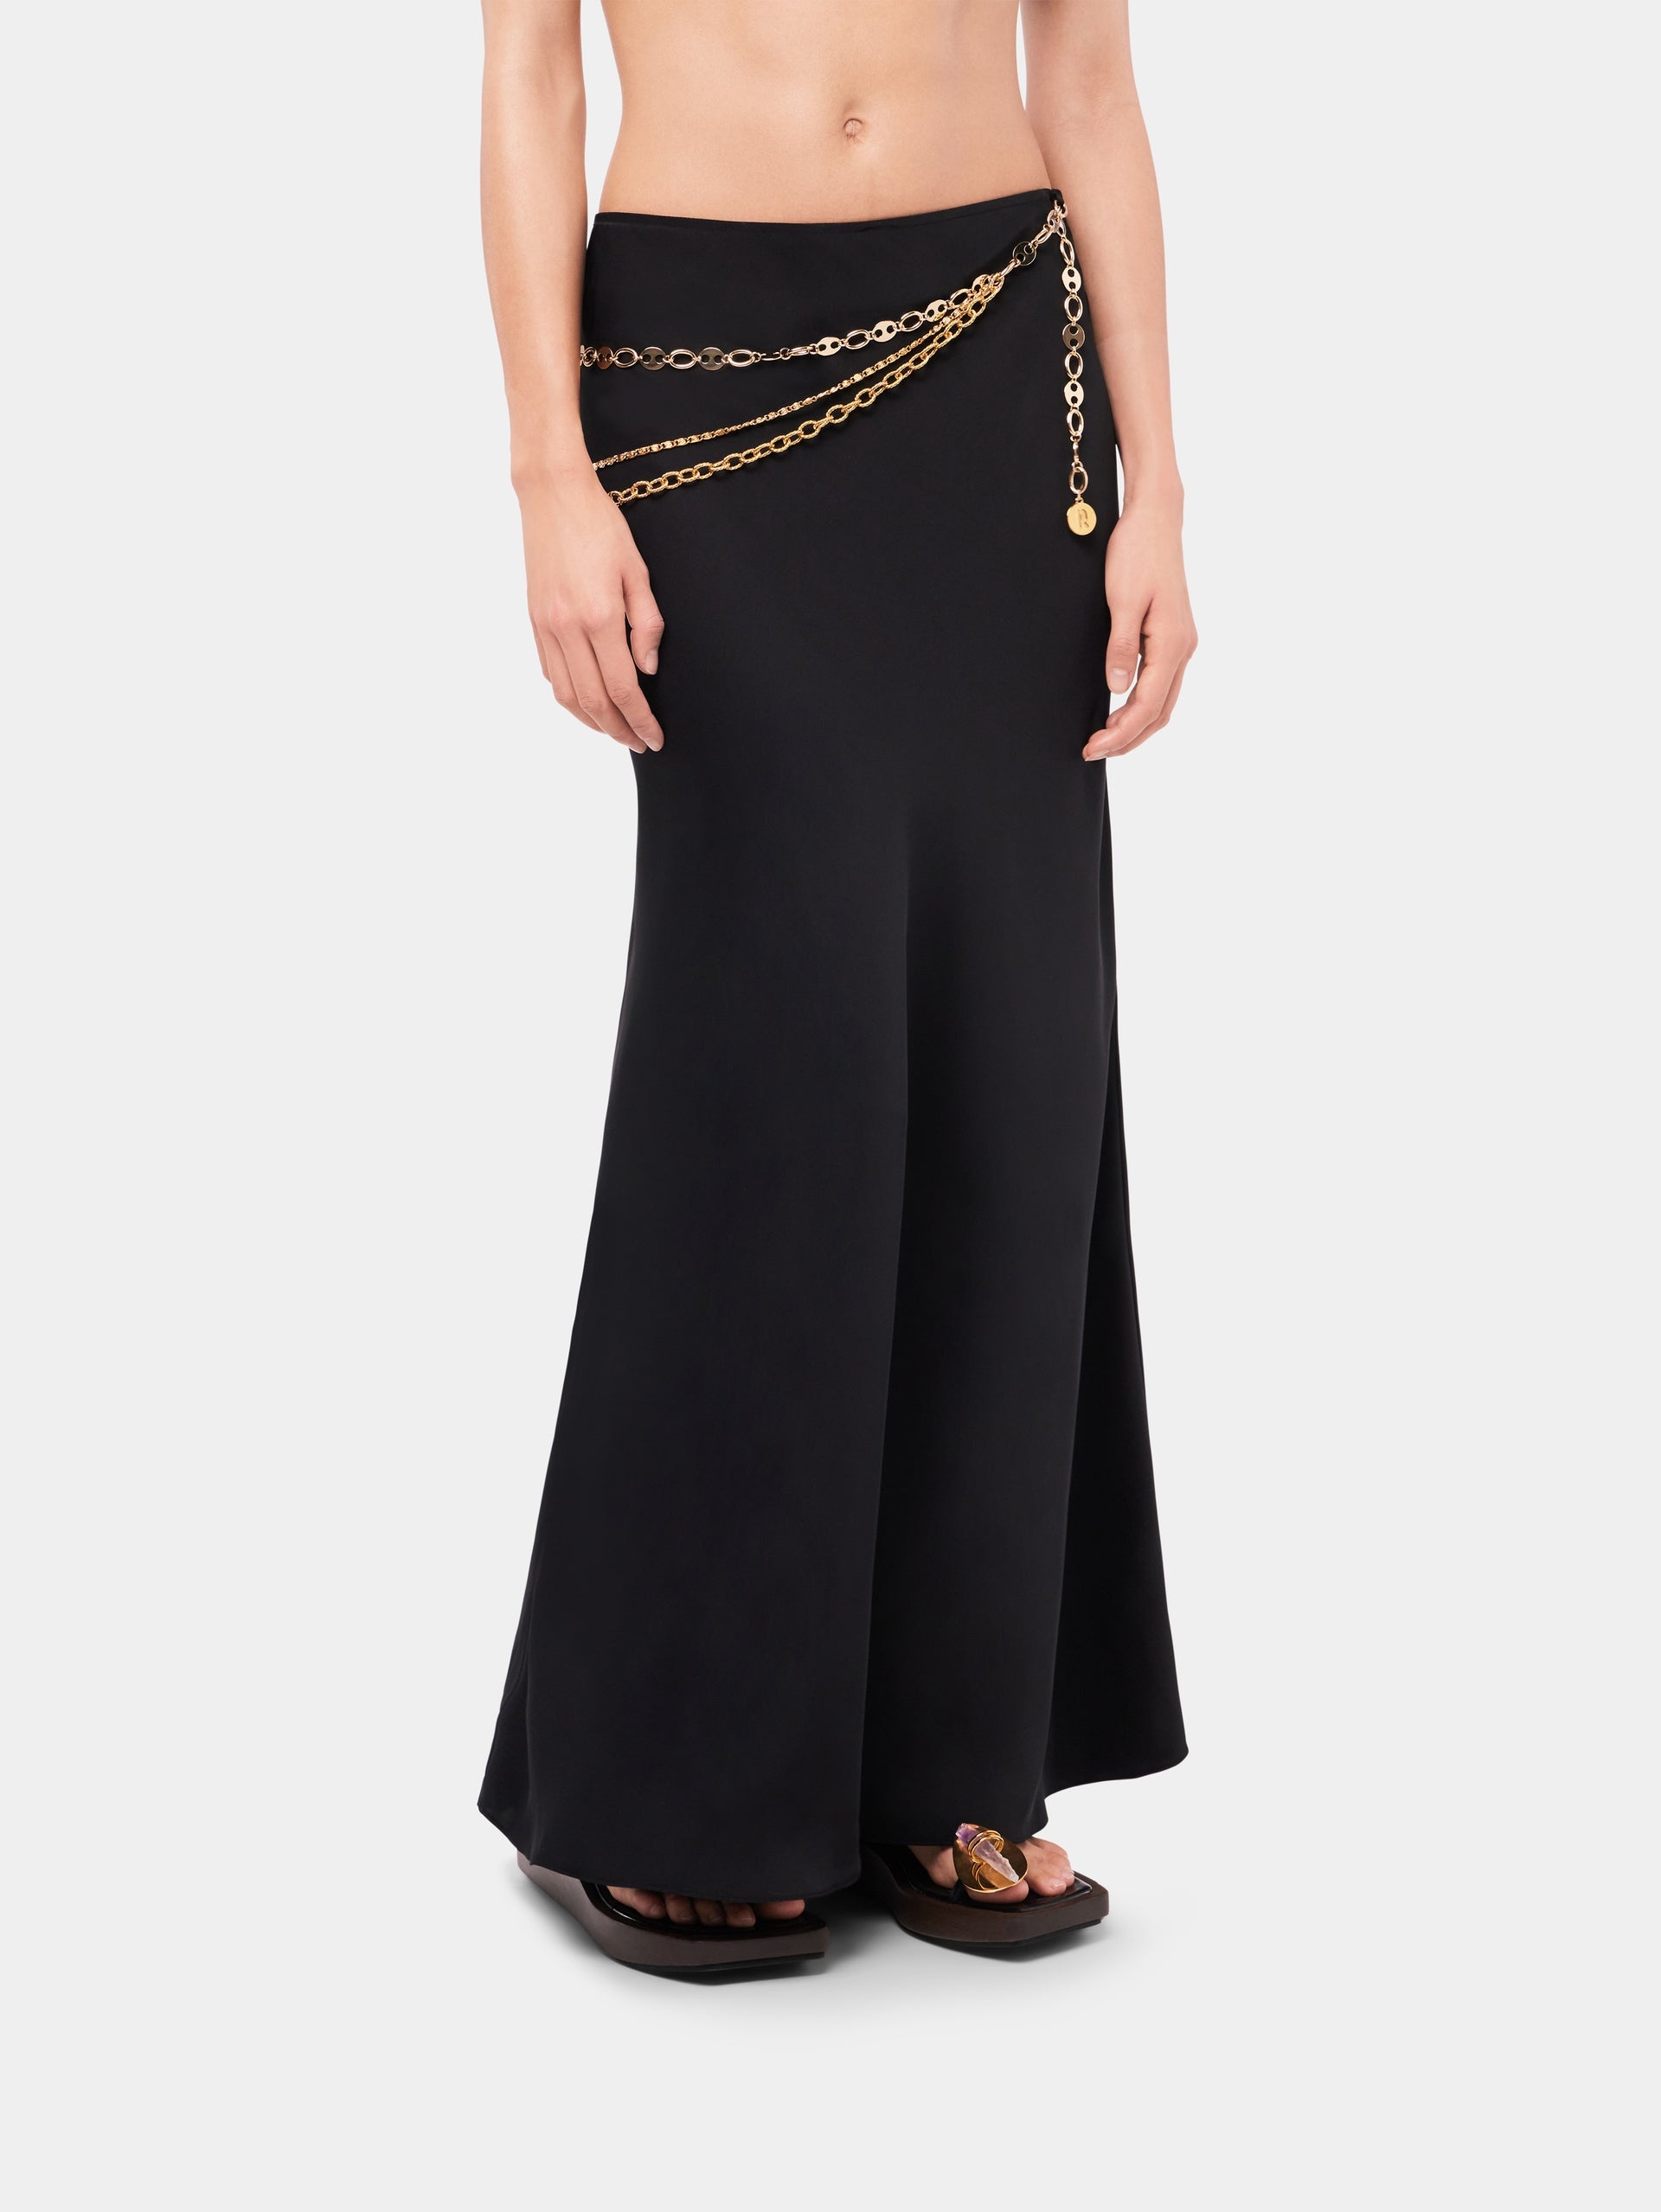 LONG BLACK SKIRT EMBELLISHED WITH "EIGHT" SIGNATURE CHAIN - 4